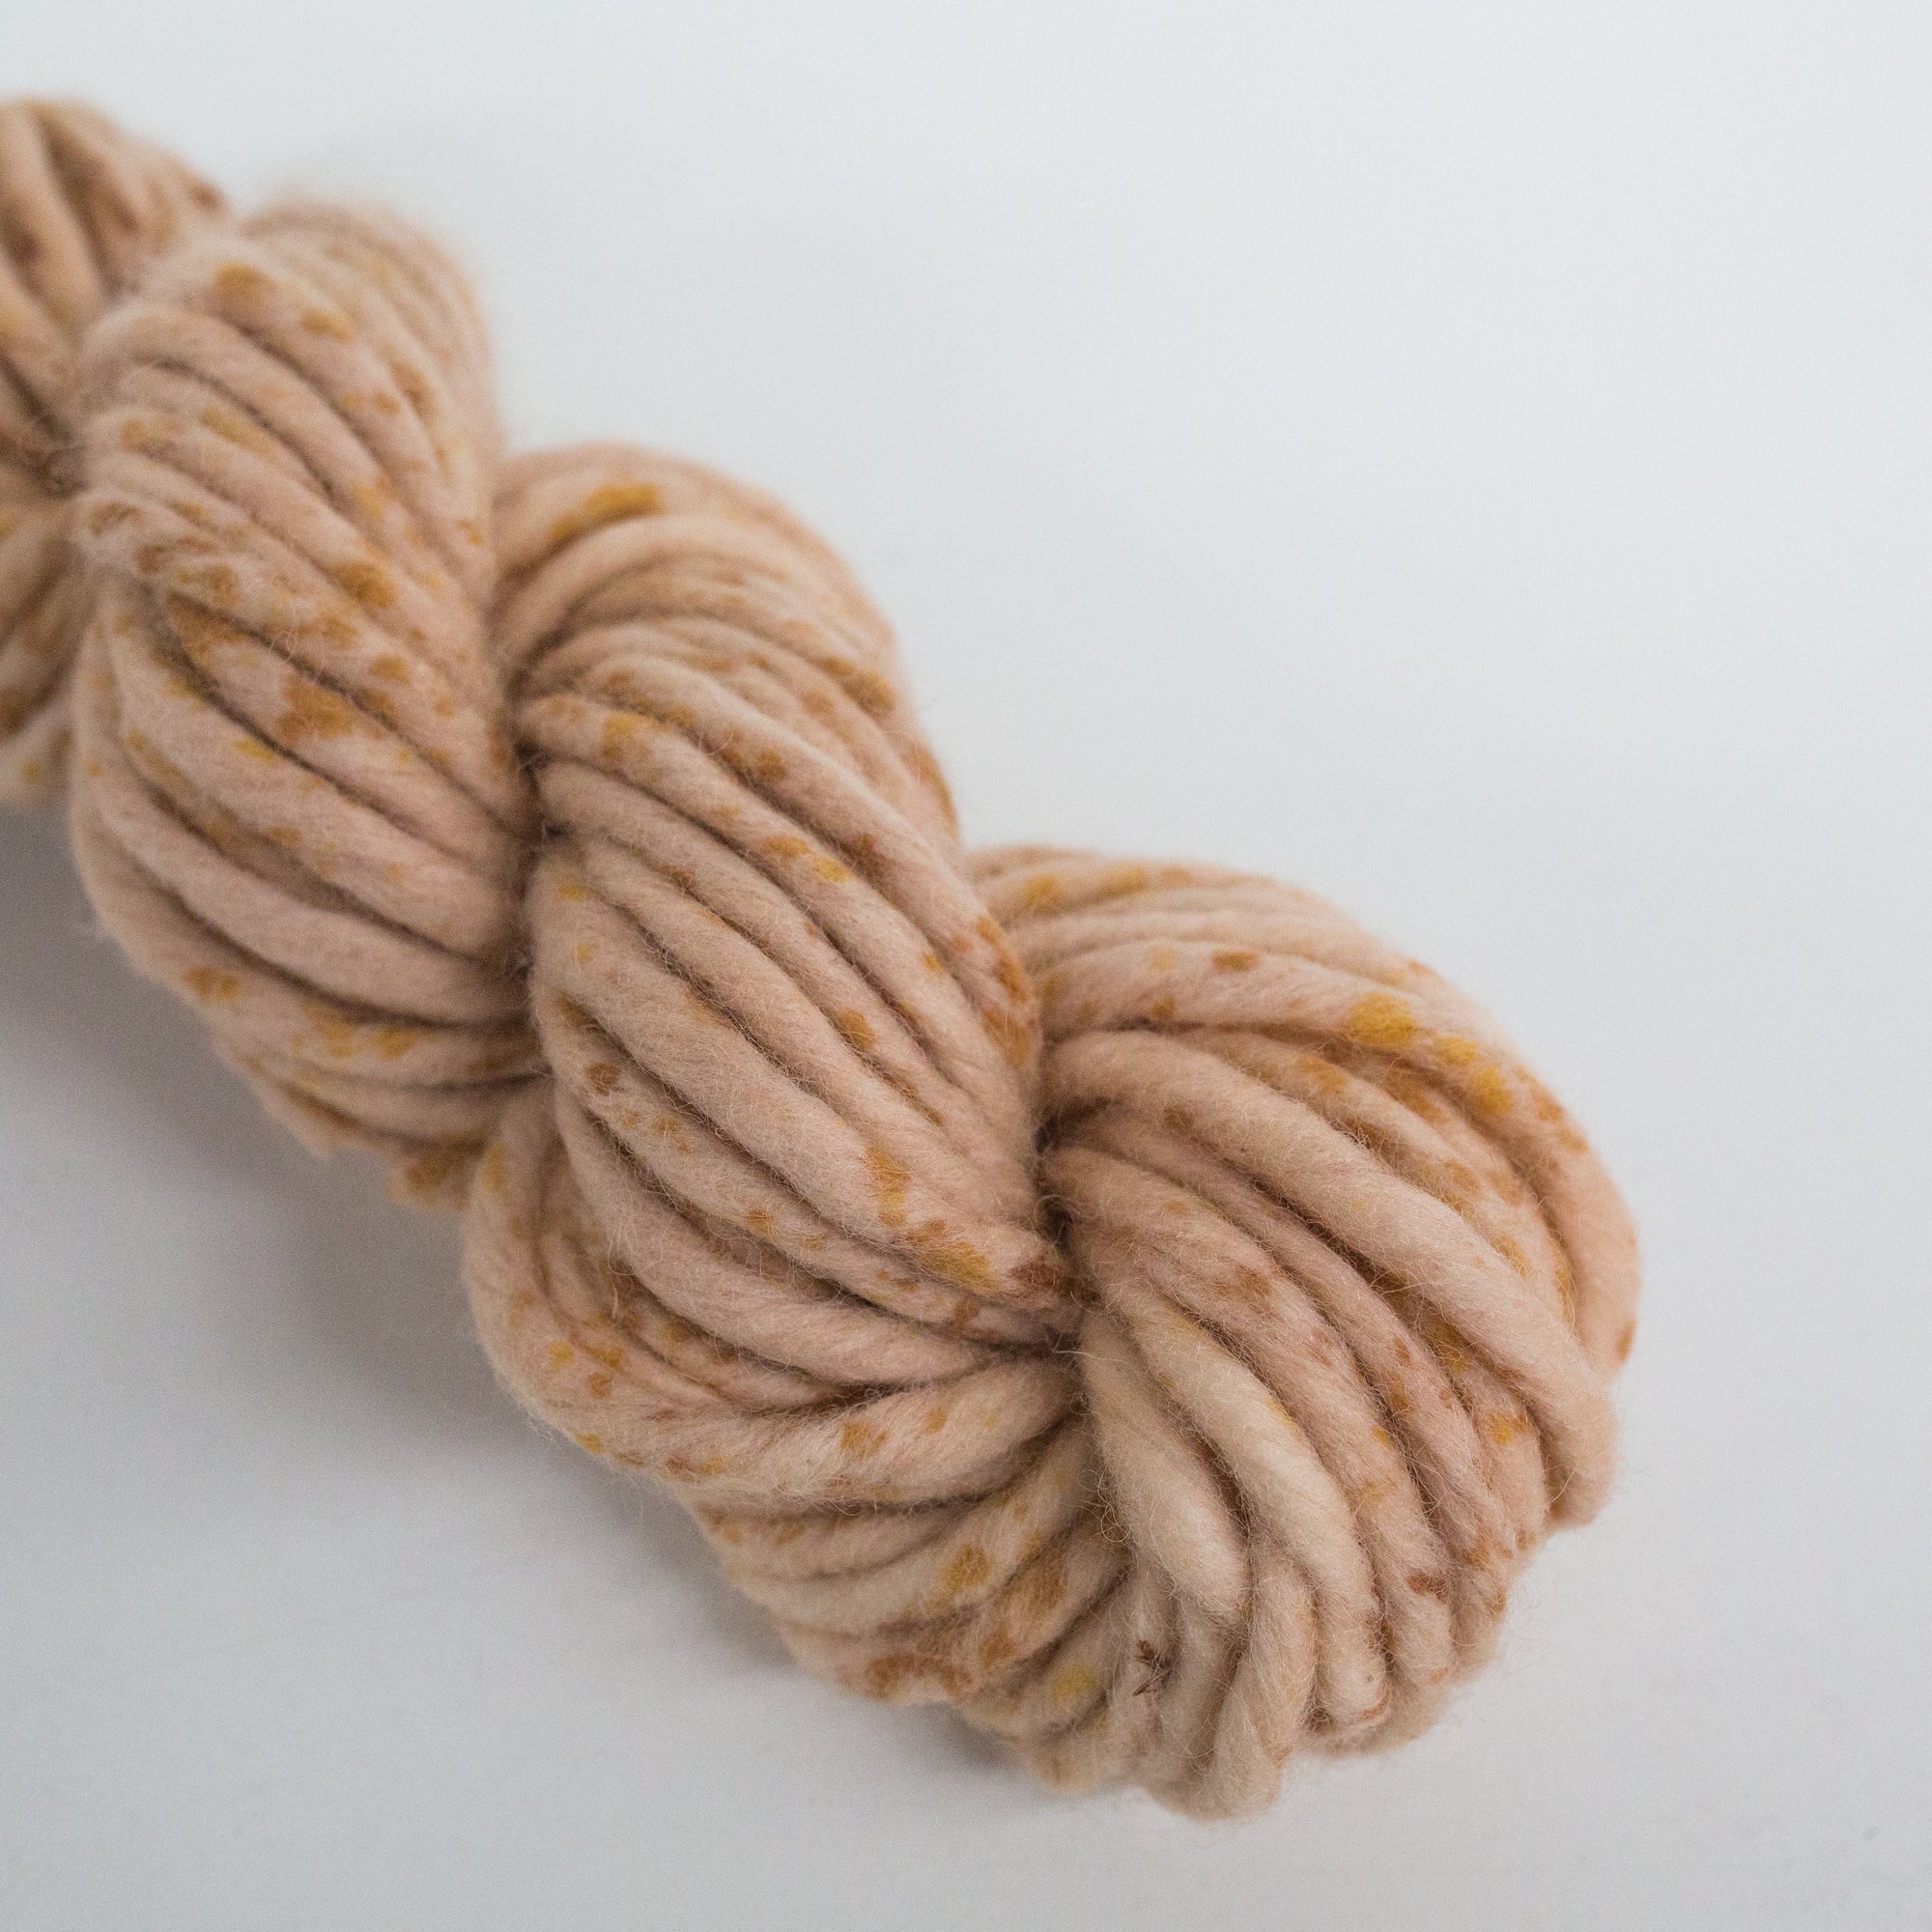 Mary Maker Studio speciality fibre Butterscotch Confetti Felted Finger Rope macrame cotton macrame rope macrame workshop macrame patterns macrame